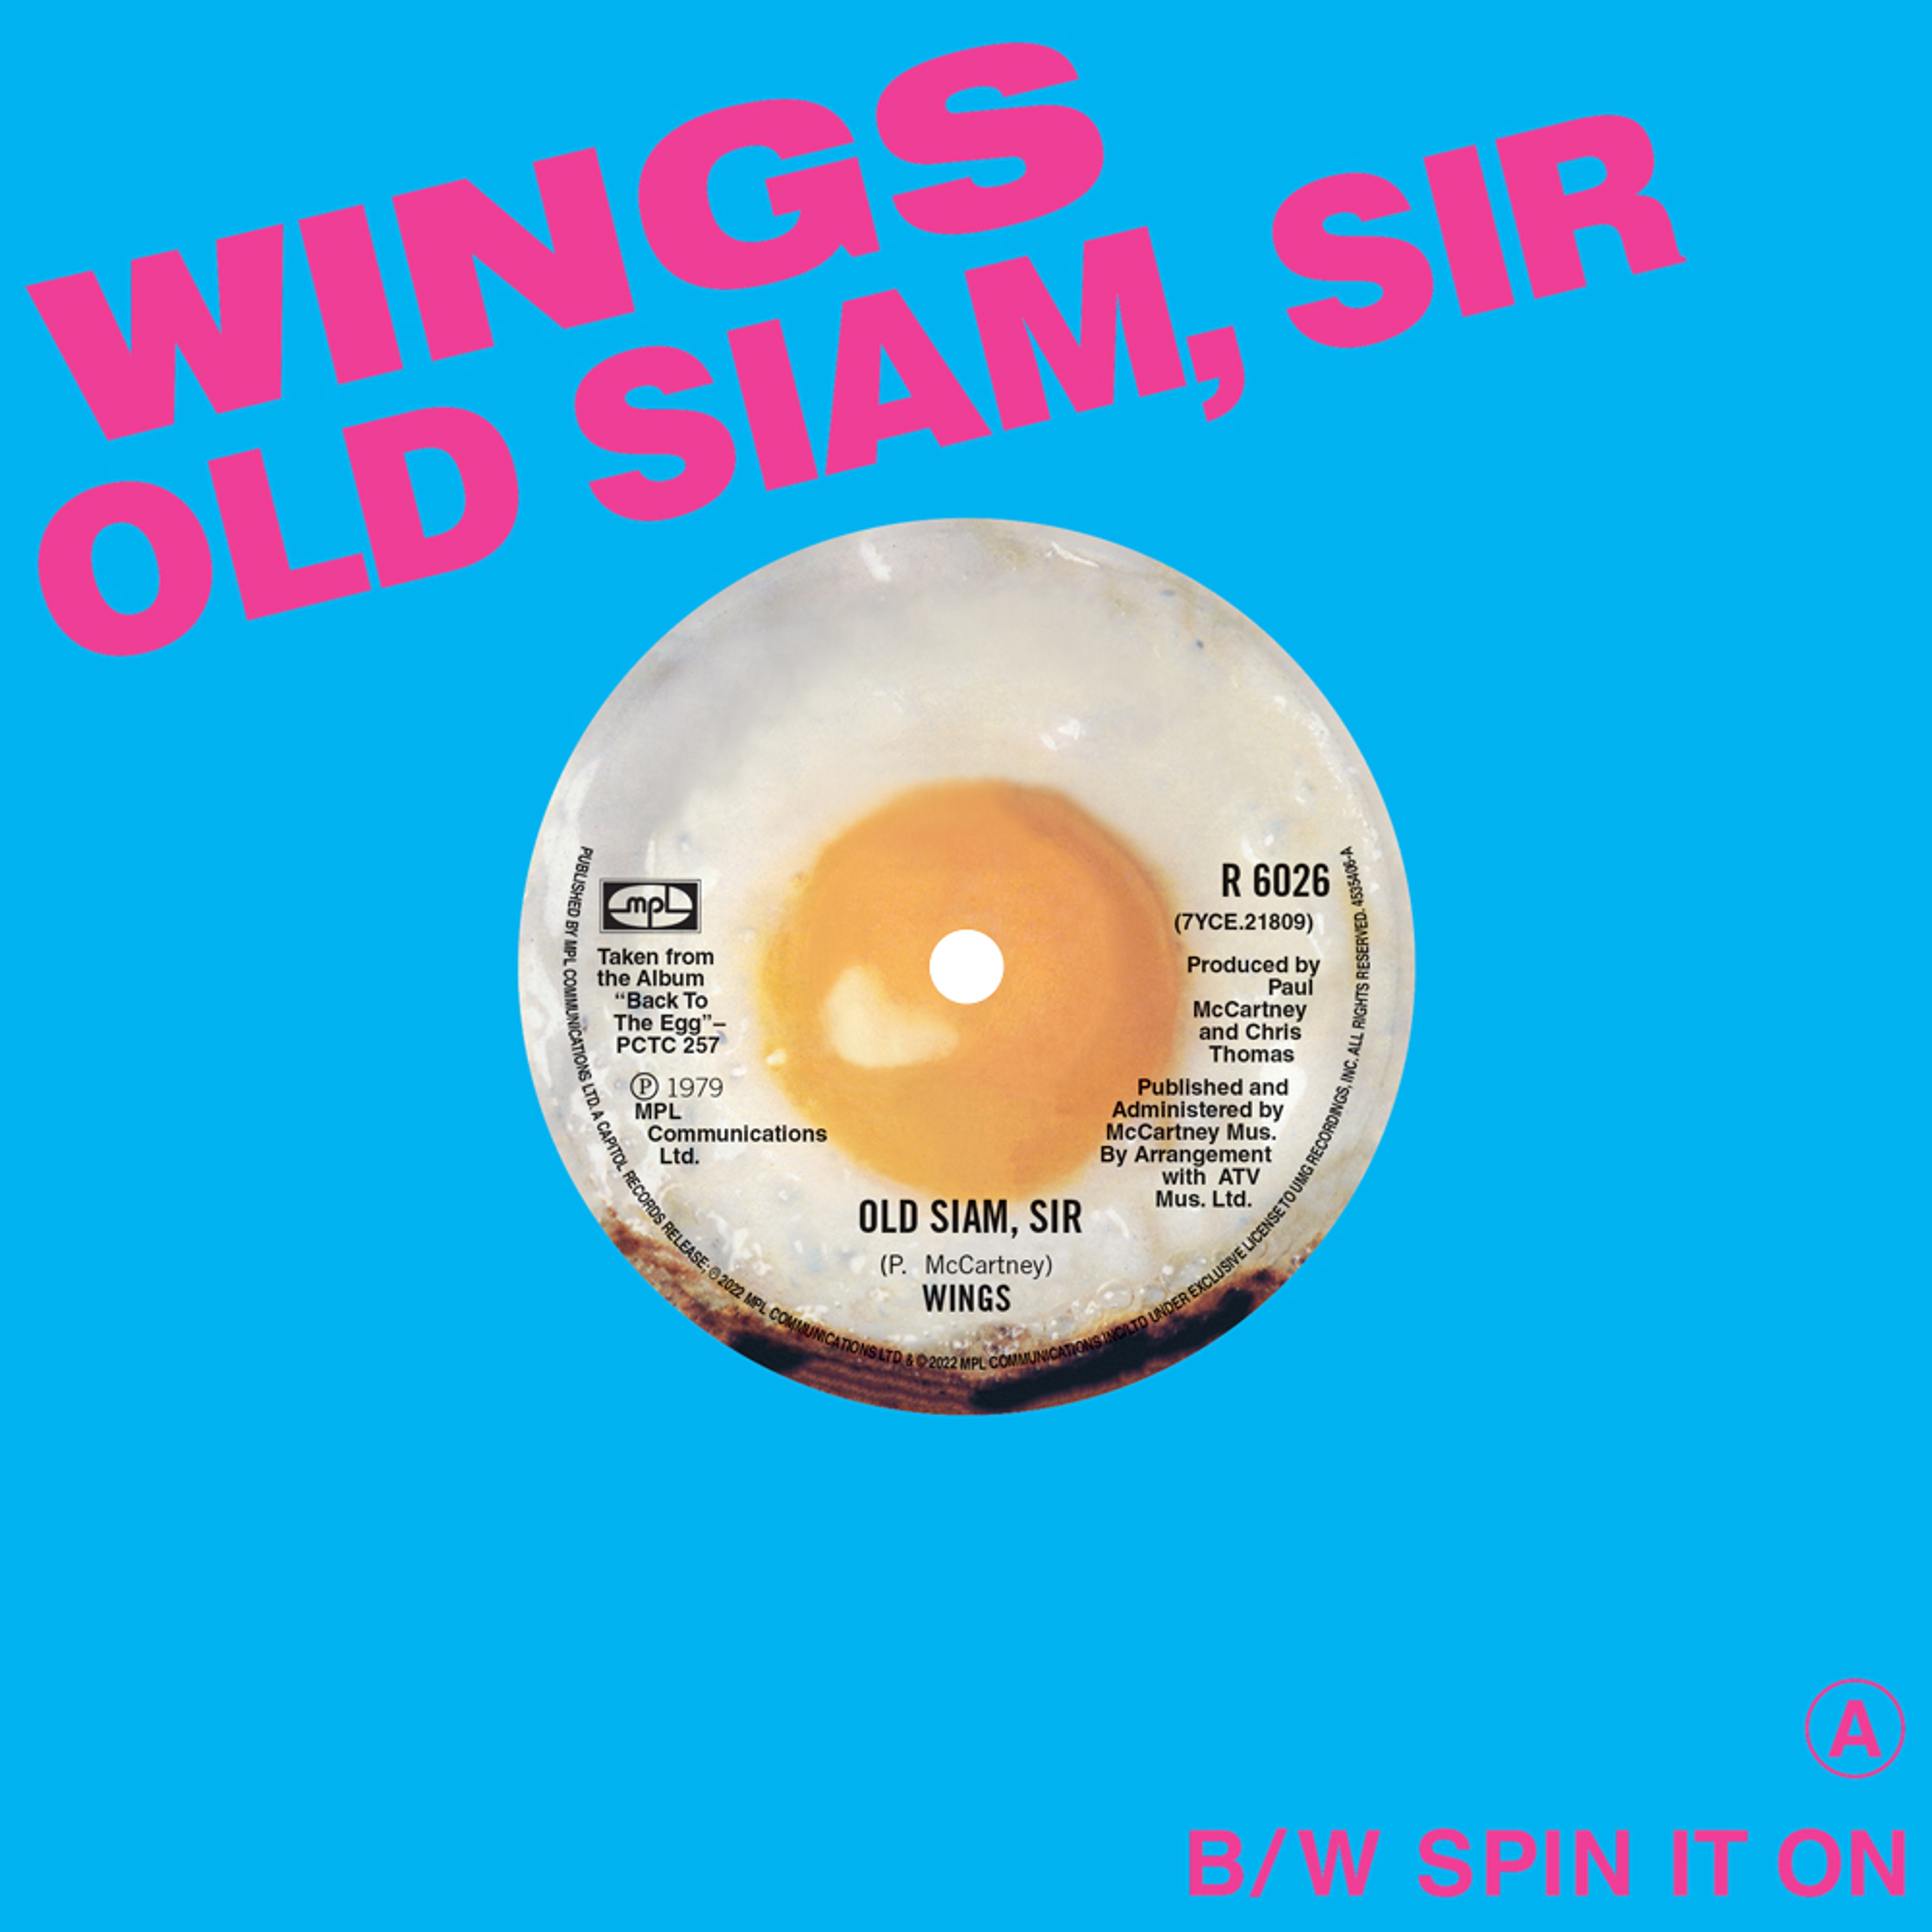 “Old Siam, Sir” Single artwork as featured in 'The 7" Singles Box'